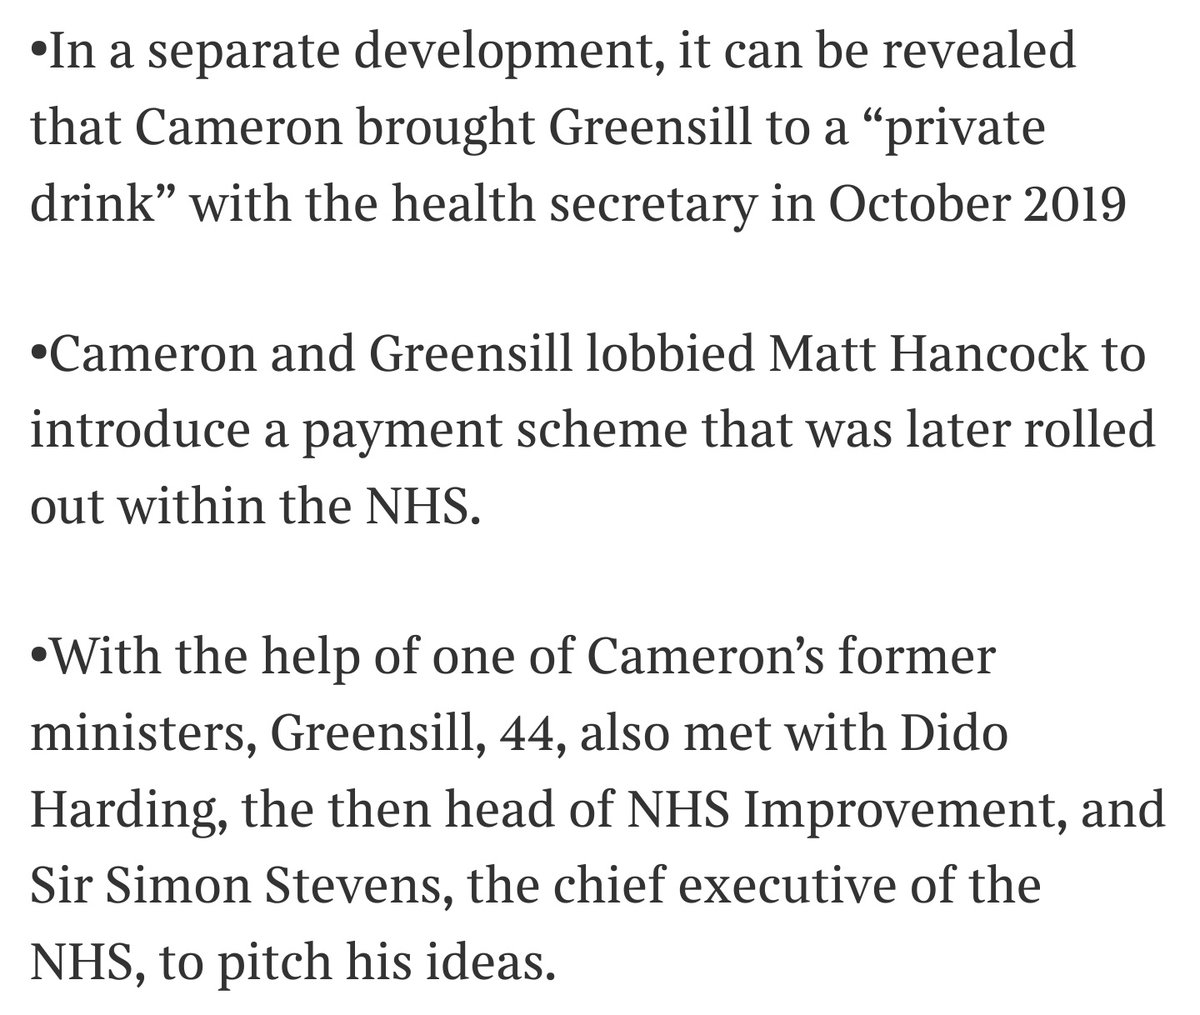 Da fuck?! https://www.thetimes.co.uk/article/david-cameron-lobbied-no-10-and-hancock-for-greensill-nht3x2c5z @MattHancock, Simon Stevens, Chief Executive of  @NHSEngland, and  @didoharding, Chair of  #NHSImprovement (now merged with  #NHSE) in  #corrupt  #Greensill deal with  @David_Cameron? #Oligarchy 2.0...